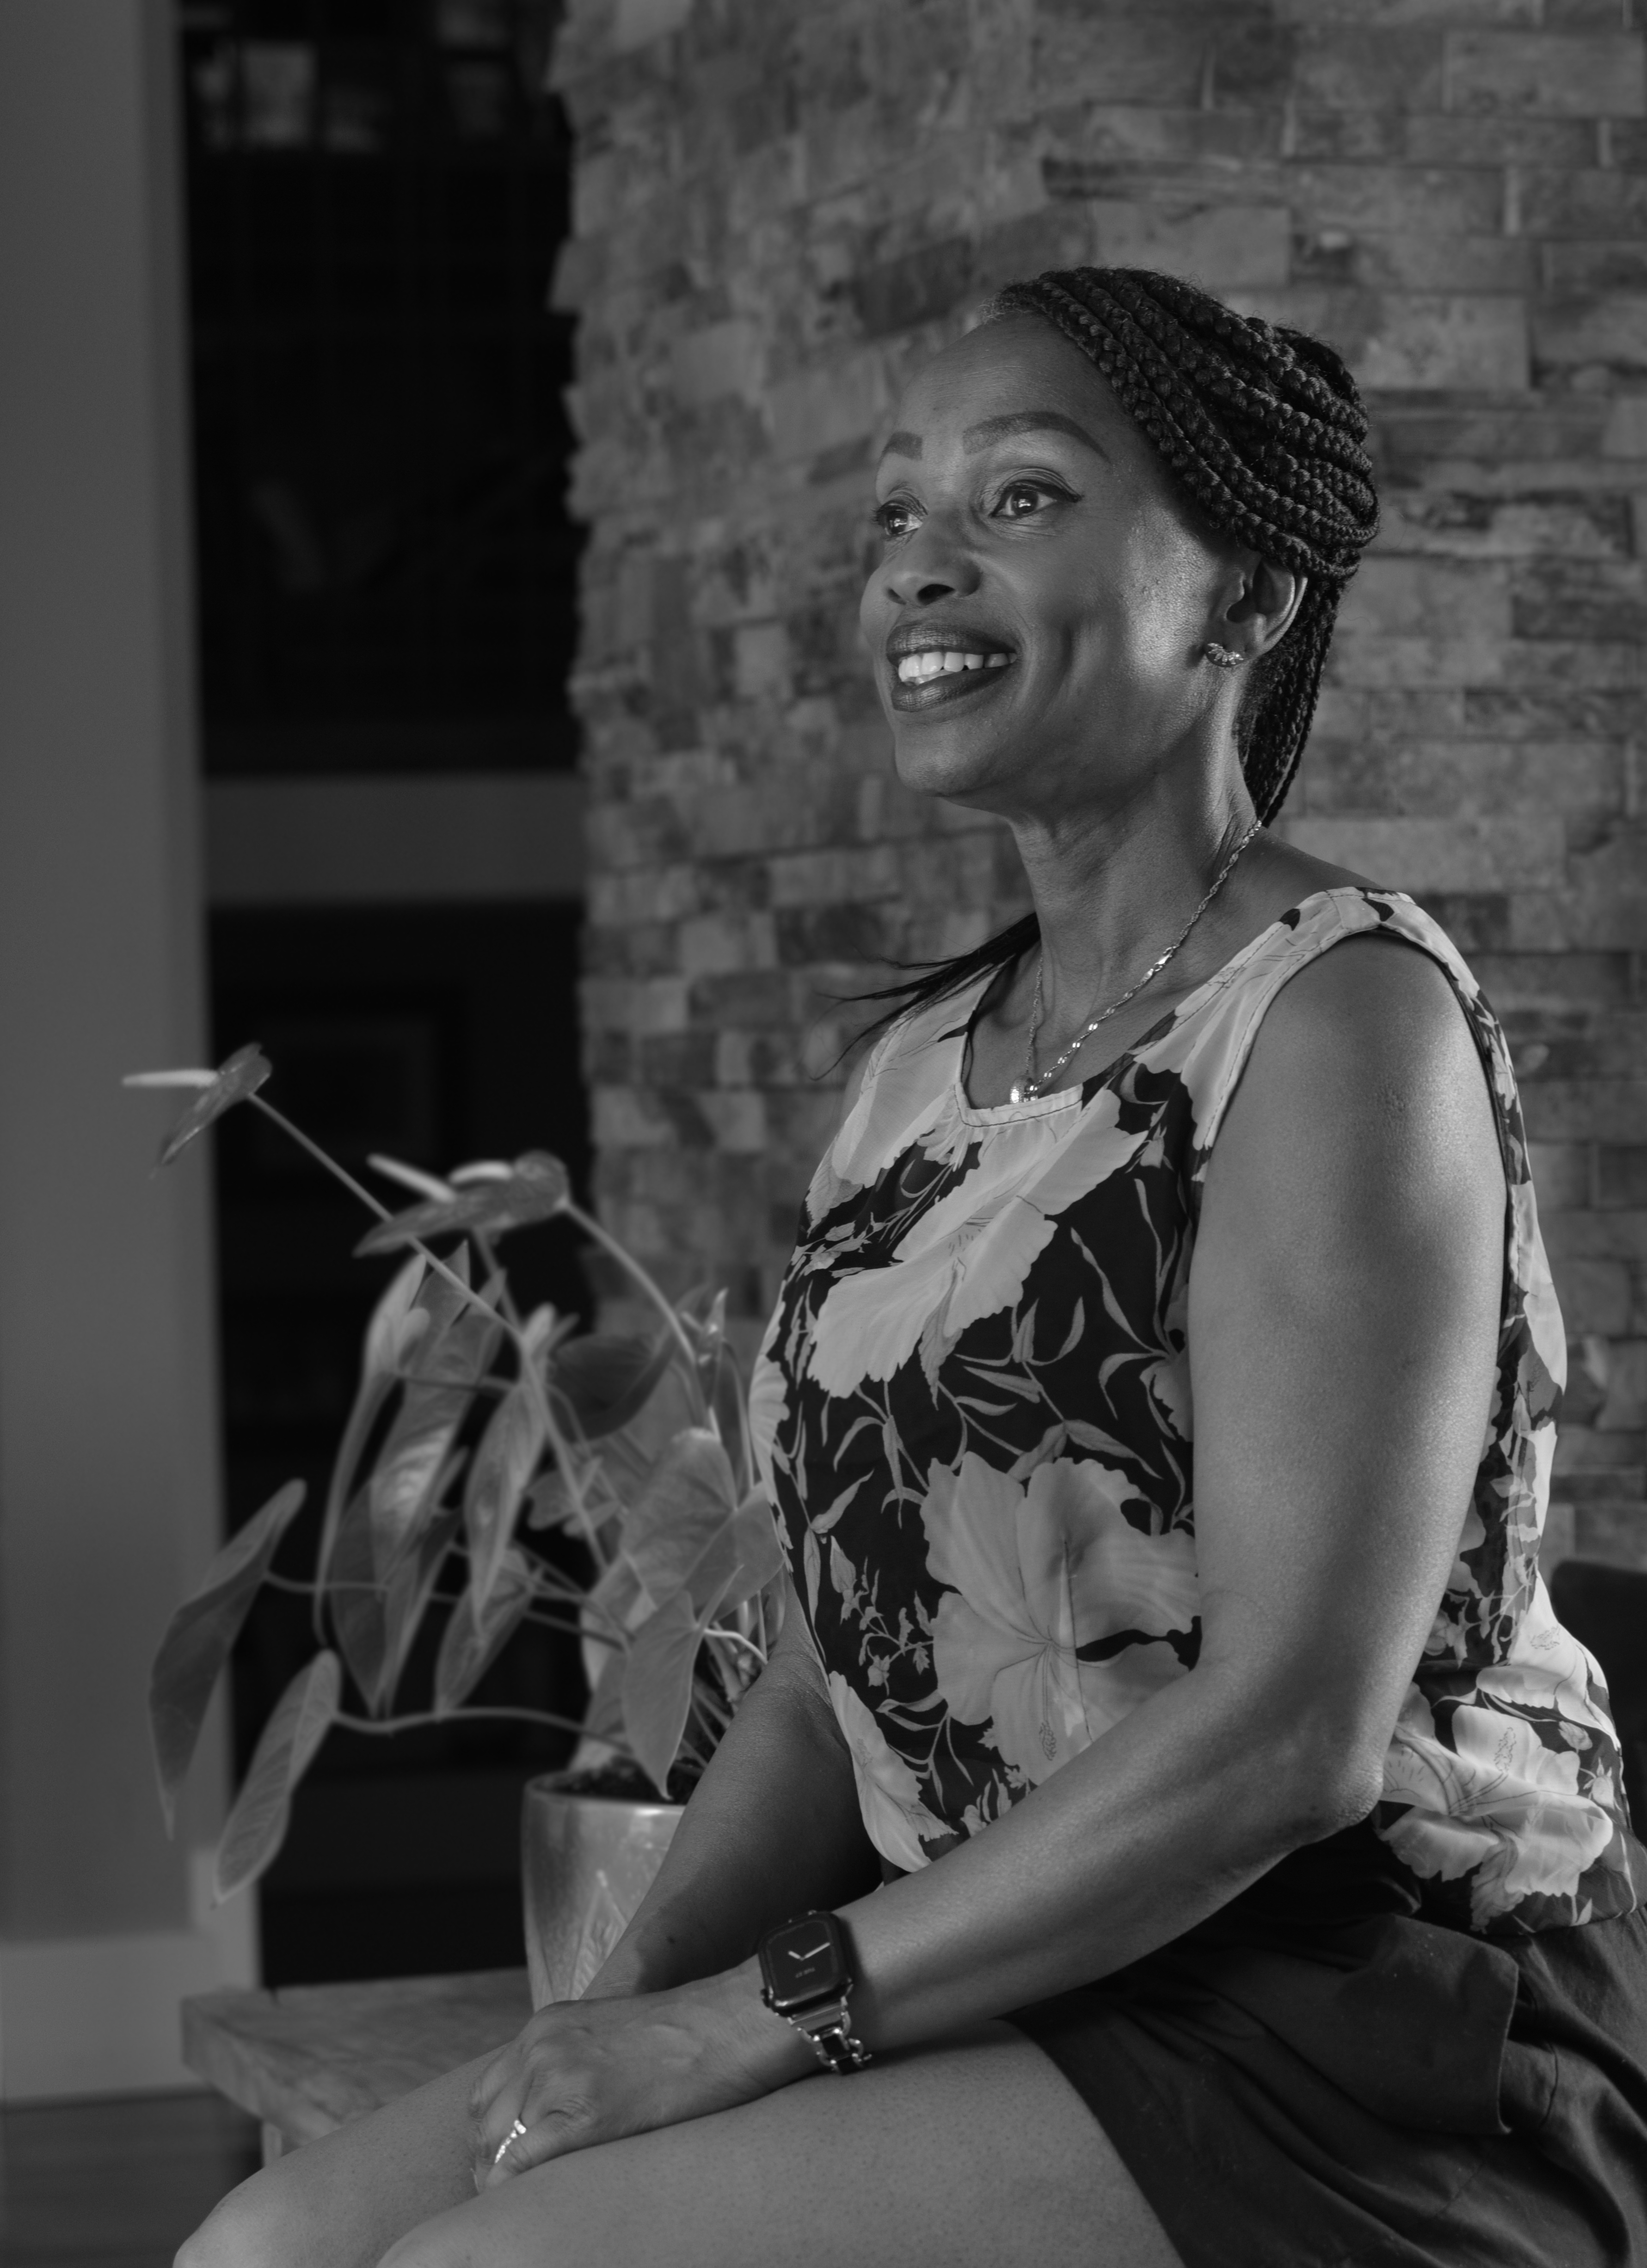 A black-and-white portrait of a Black woman sitting down, from the waist up. The woman is sitting at an angle, smiling widely.